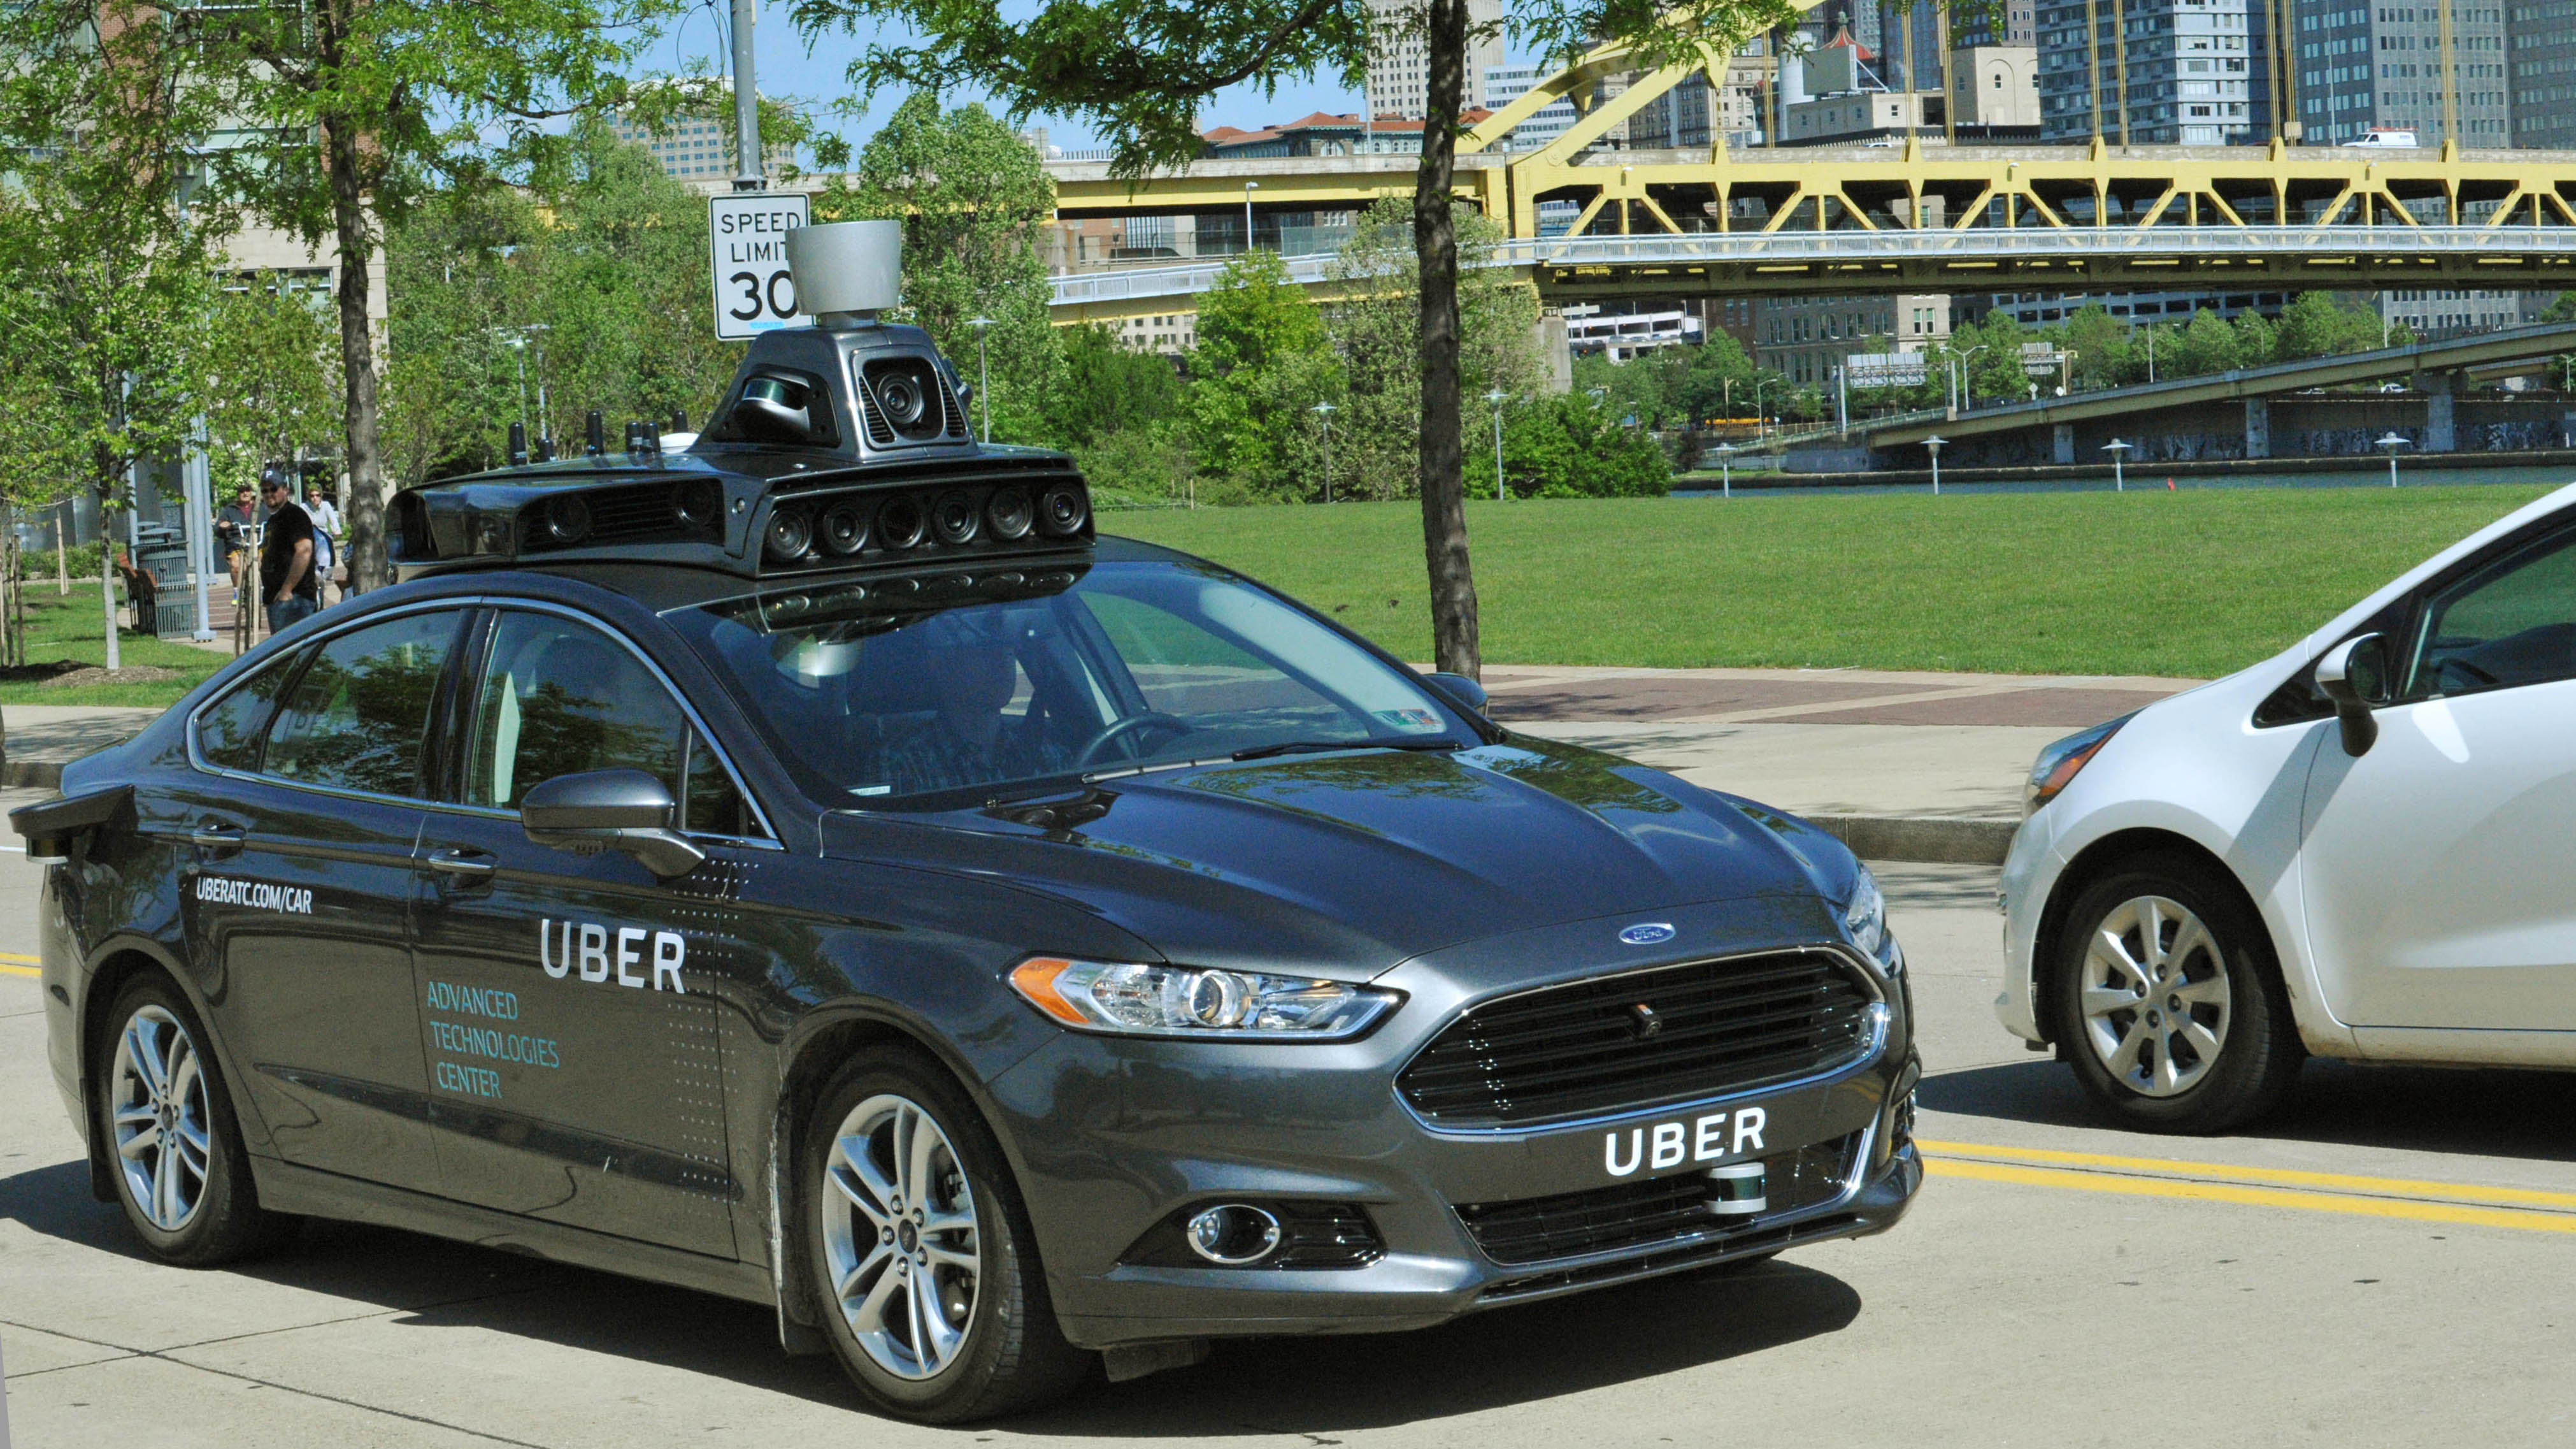 Uber May Not Be to Blame for Self-Driving Car Death in Arizona | Fortune